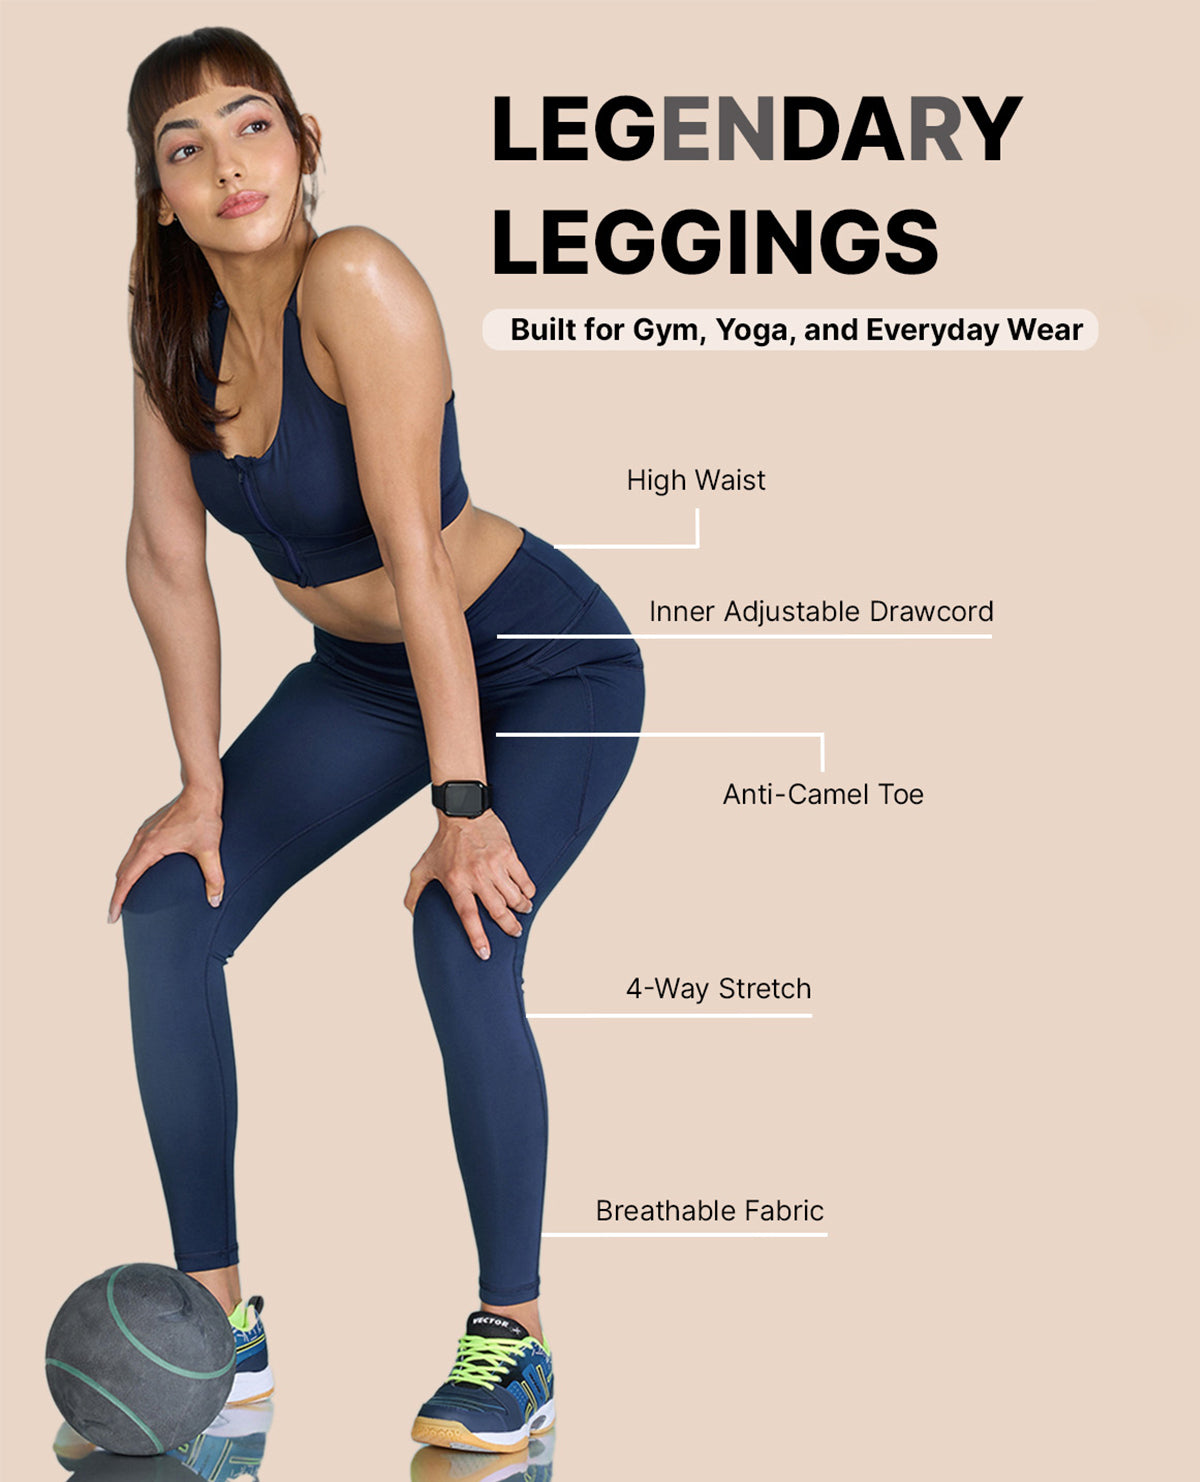 Ultrasoft SkinFit Leggings - Lycra Cotton - All Sizes - Many Colors at Rs  145, Ghaziabad